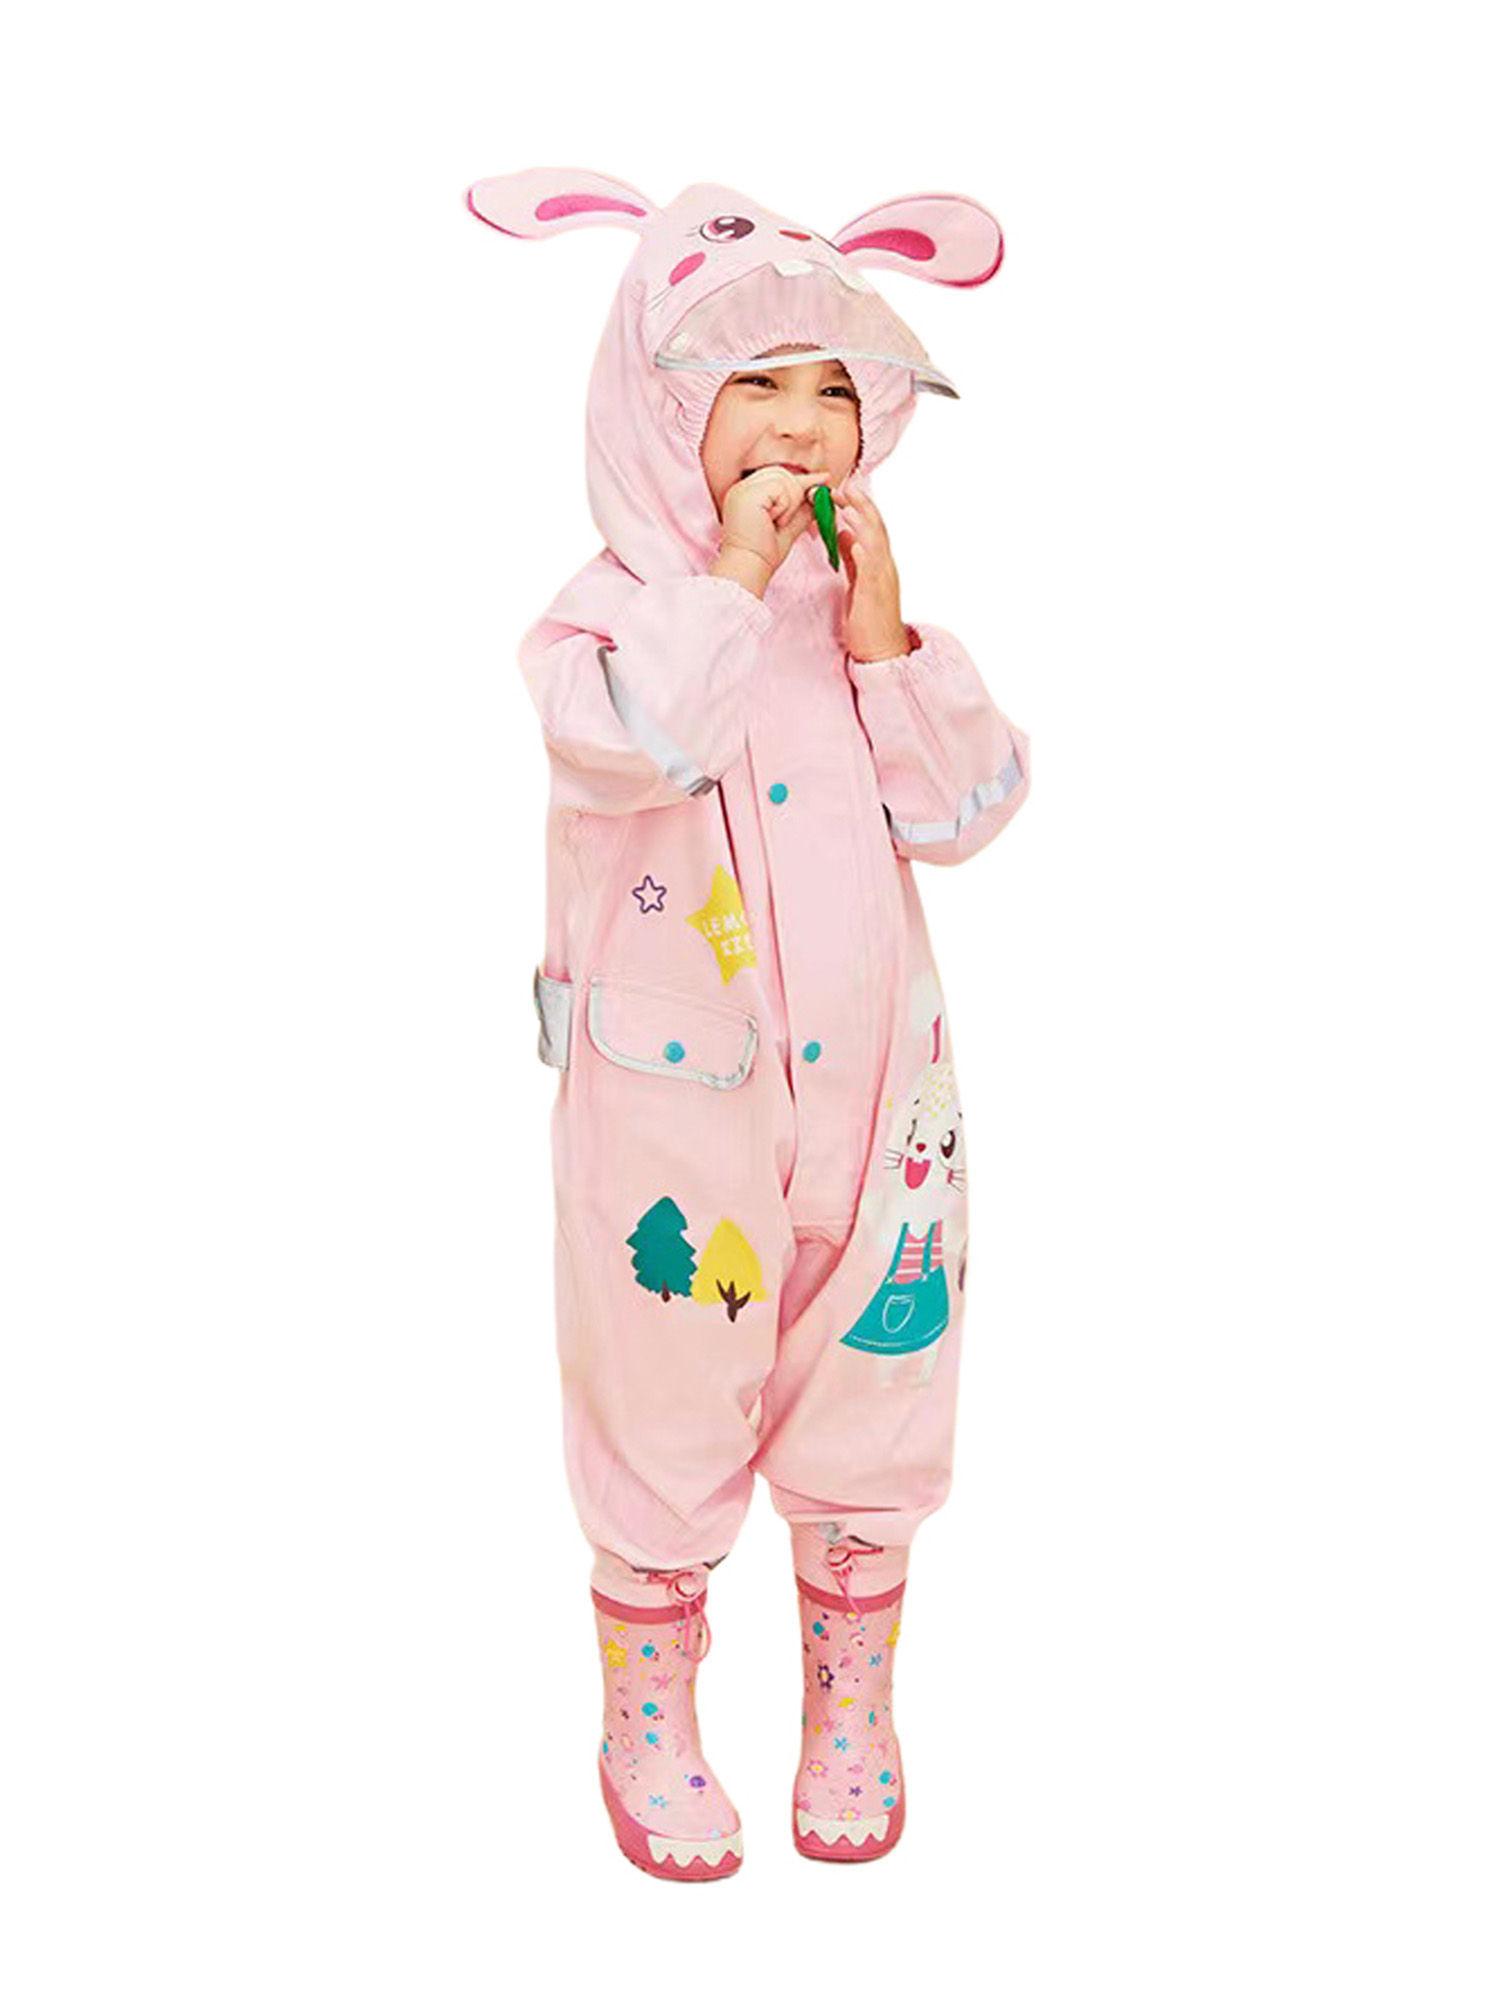 all-over-raincoat-for-kids-baby-pink-rabbit-theme